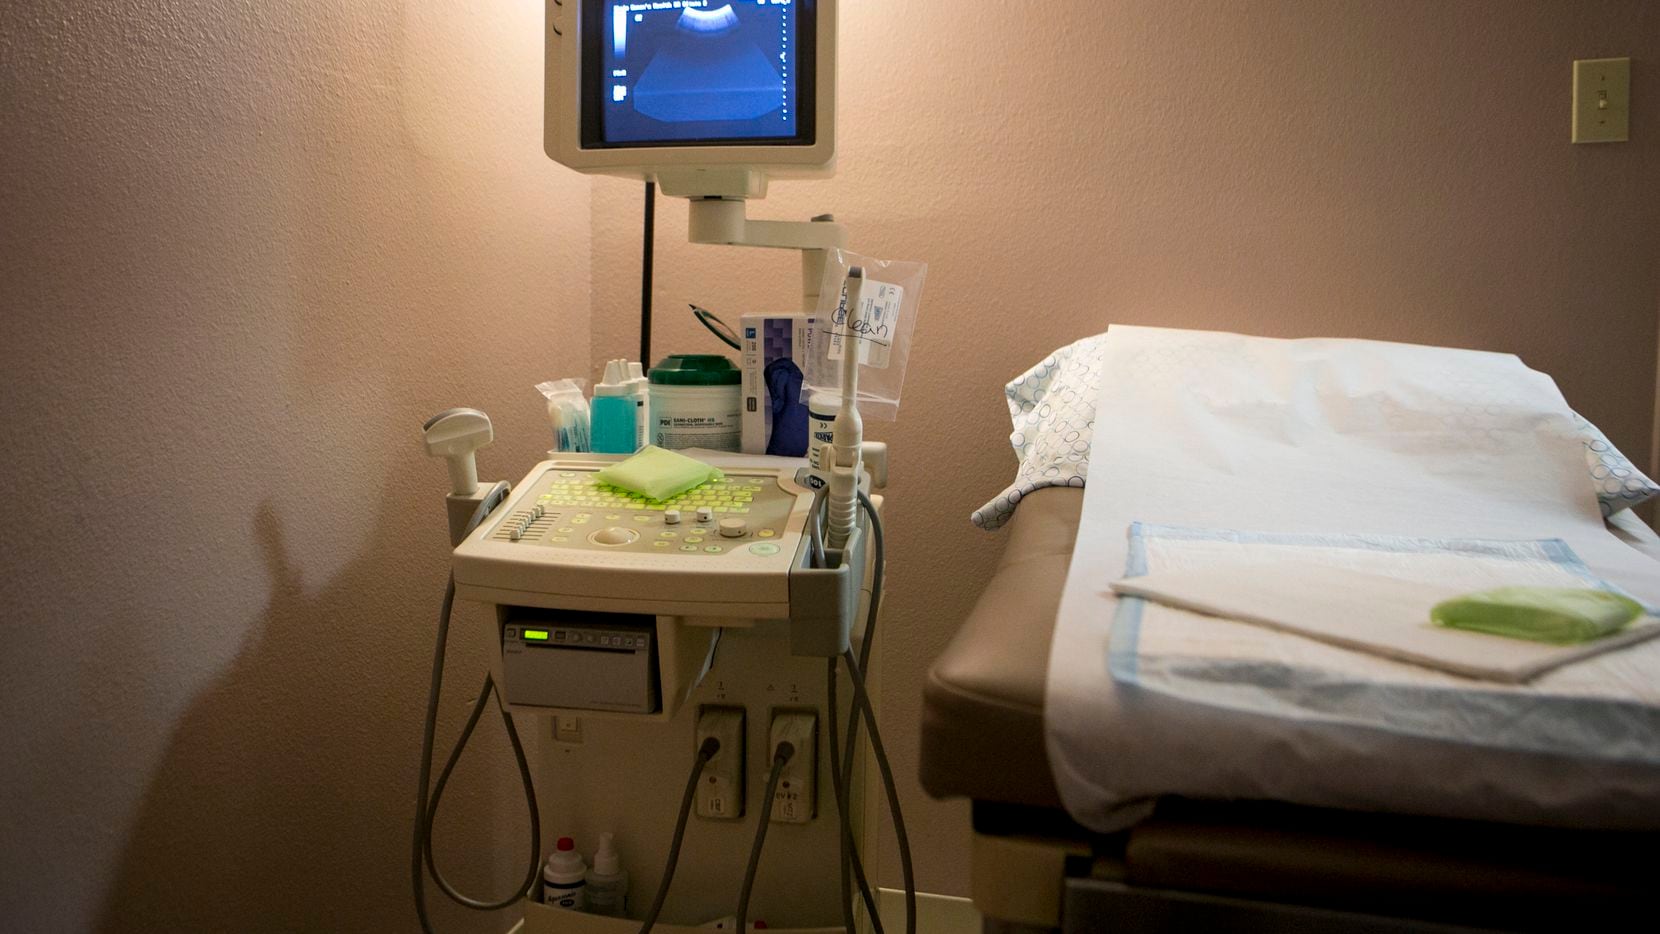 Abortion providers often use third-party special waste services that dispose of remains in...